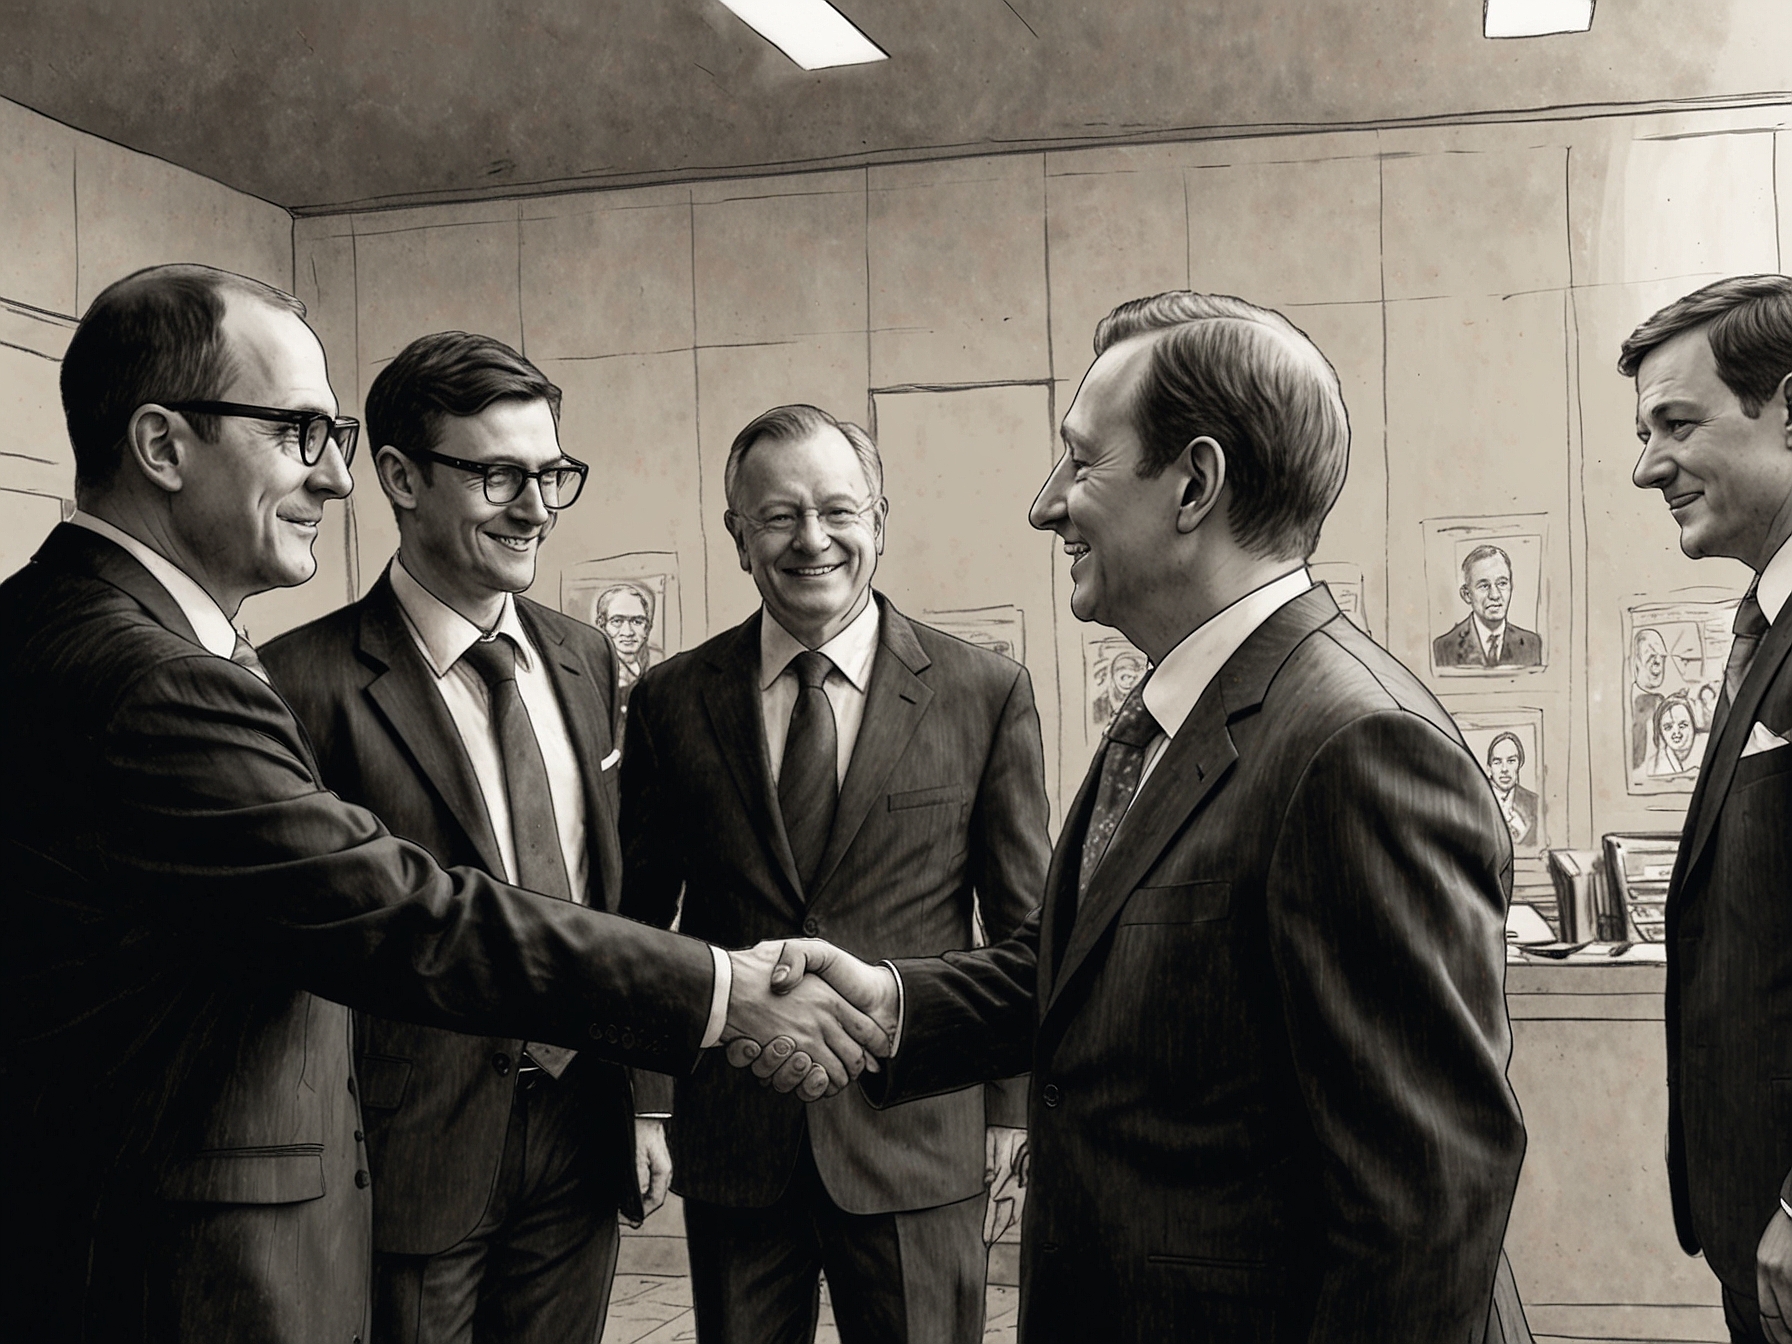 An illustration showing a handshake between government officials and Octopus Energy executives, representing the collaborative effort in repaying the £3 billion taxpayer money used in Bulb’s nationalisation.